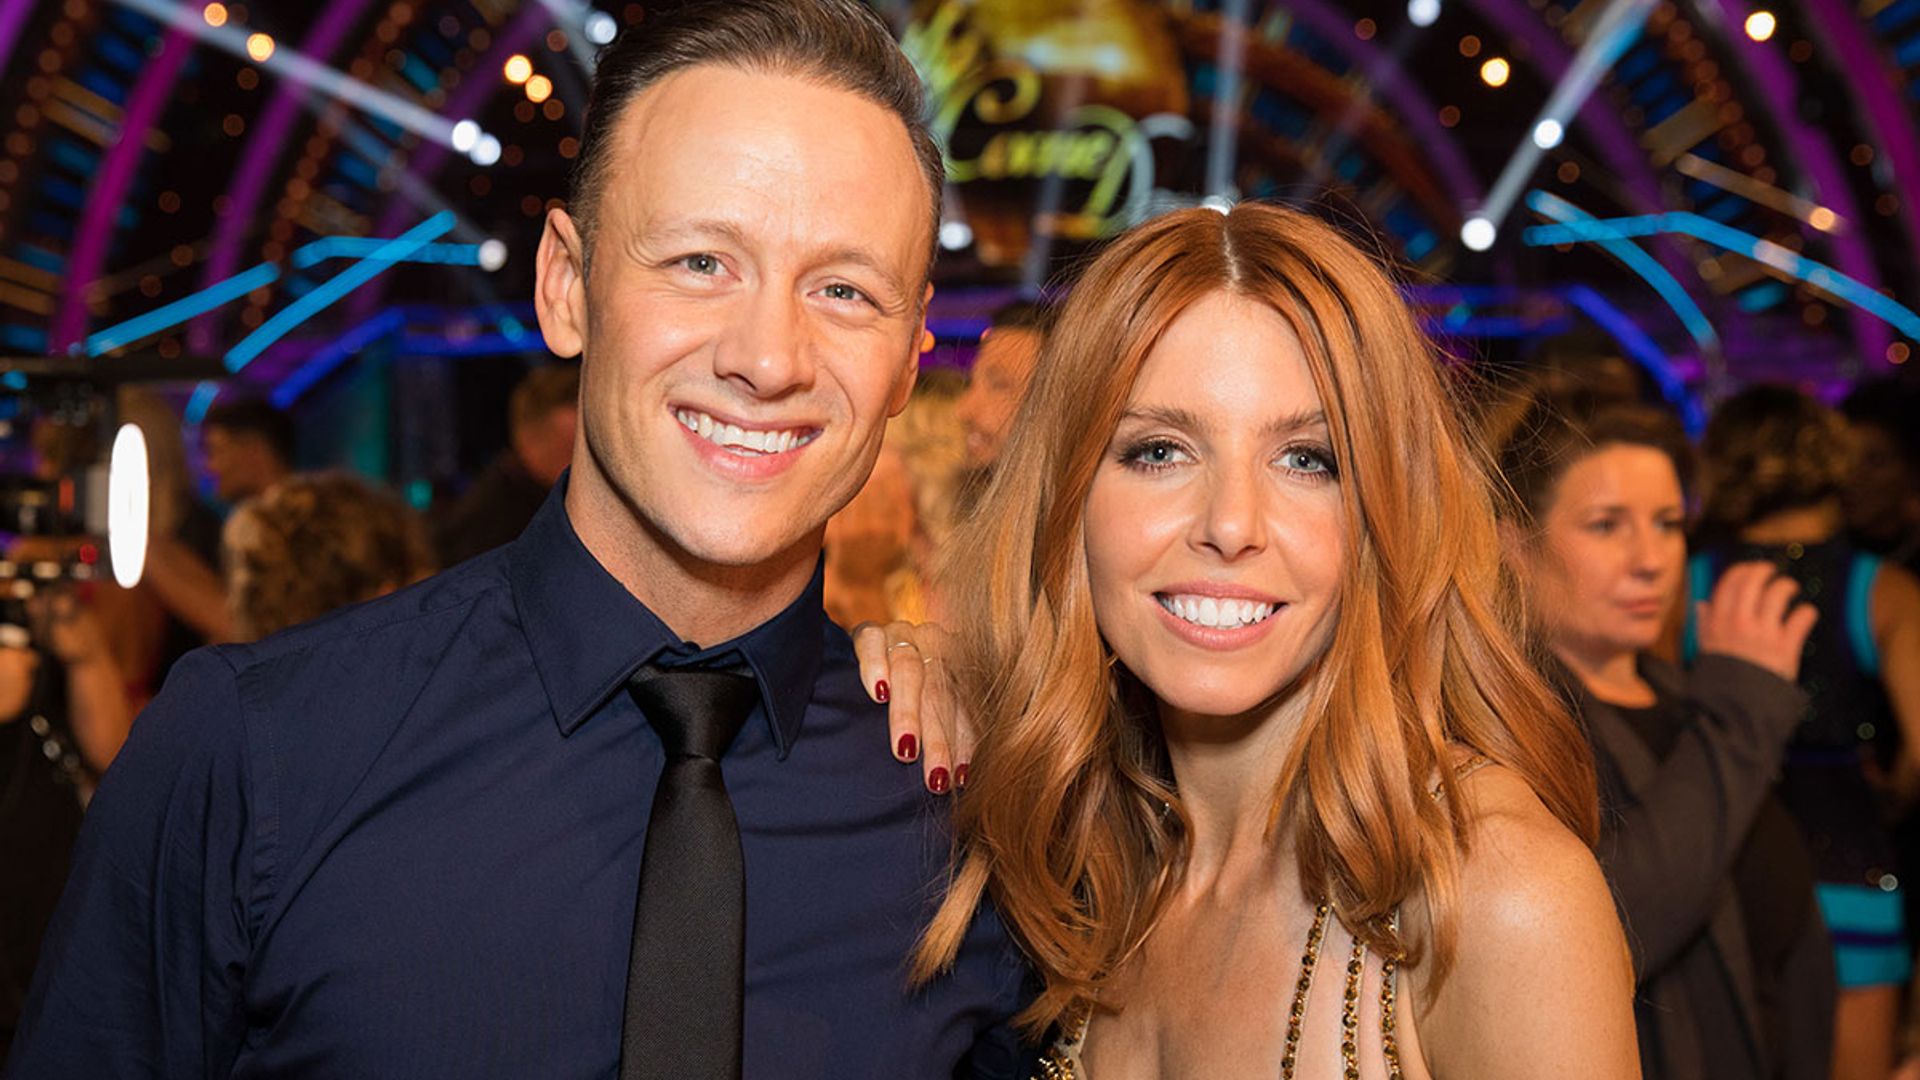 Stacey Dooley shares glimpse inside bedroom with Kevin Clifton